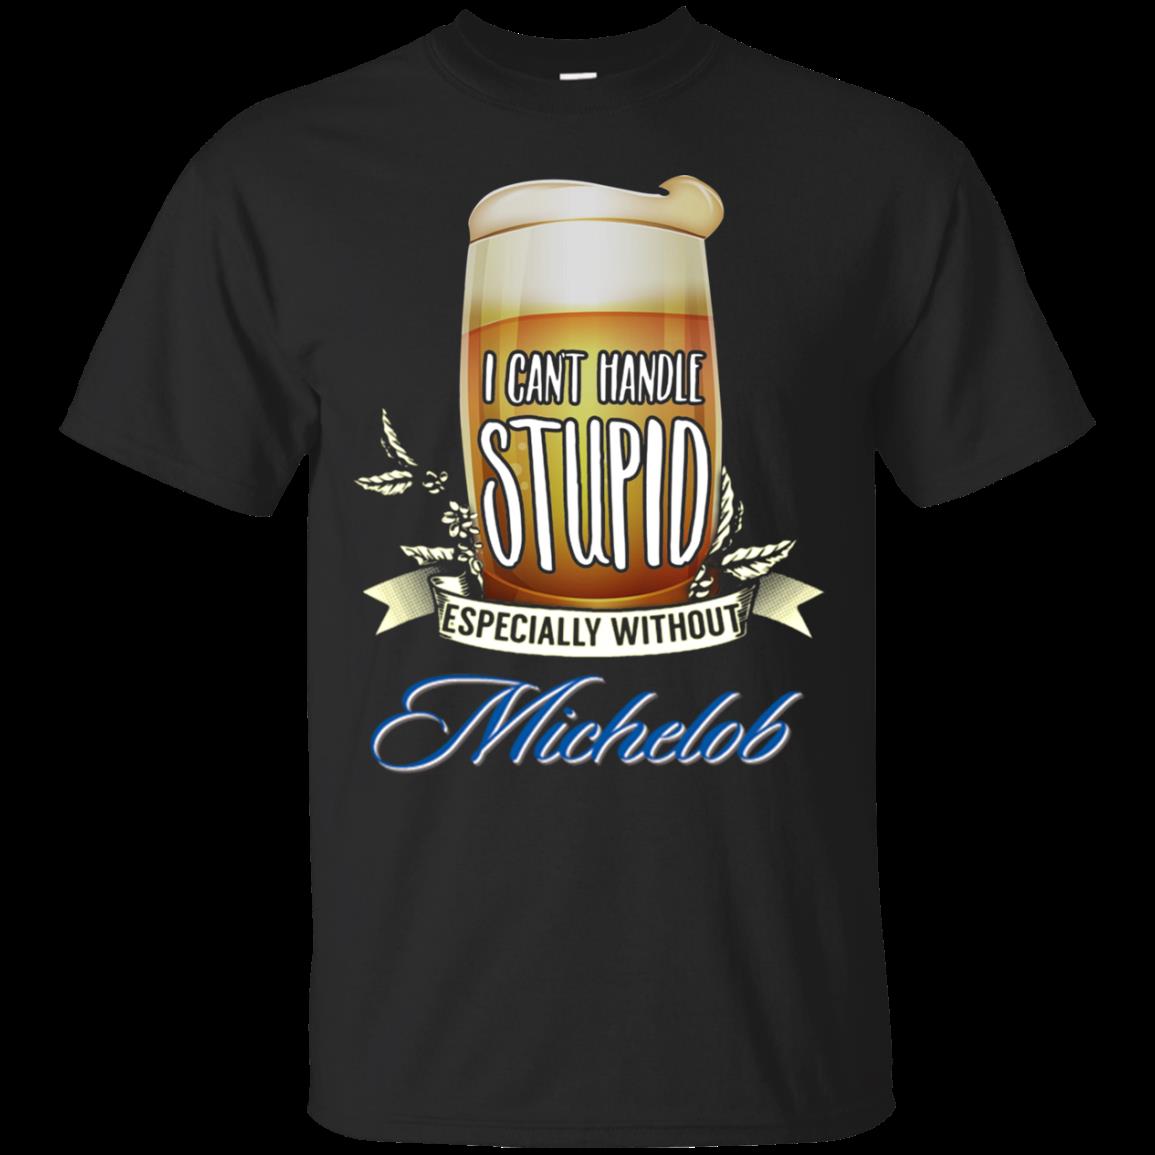 I Can’t Handle Stupid Especially Without Michelob Ultra T Shirt Hoodie Sweater